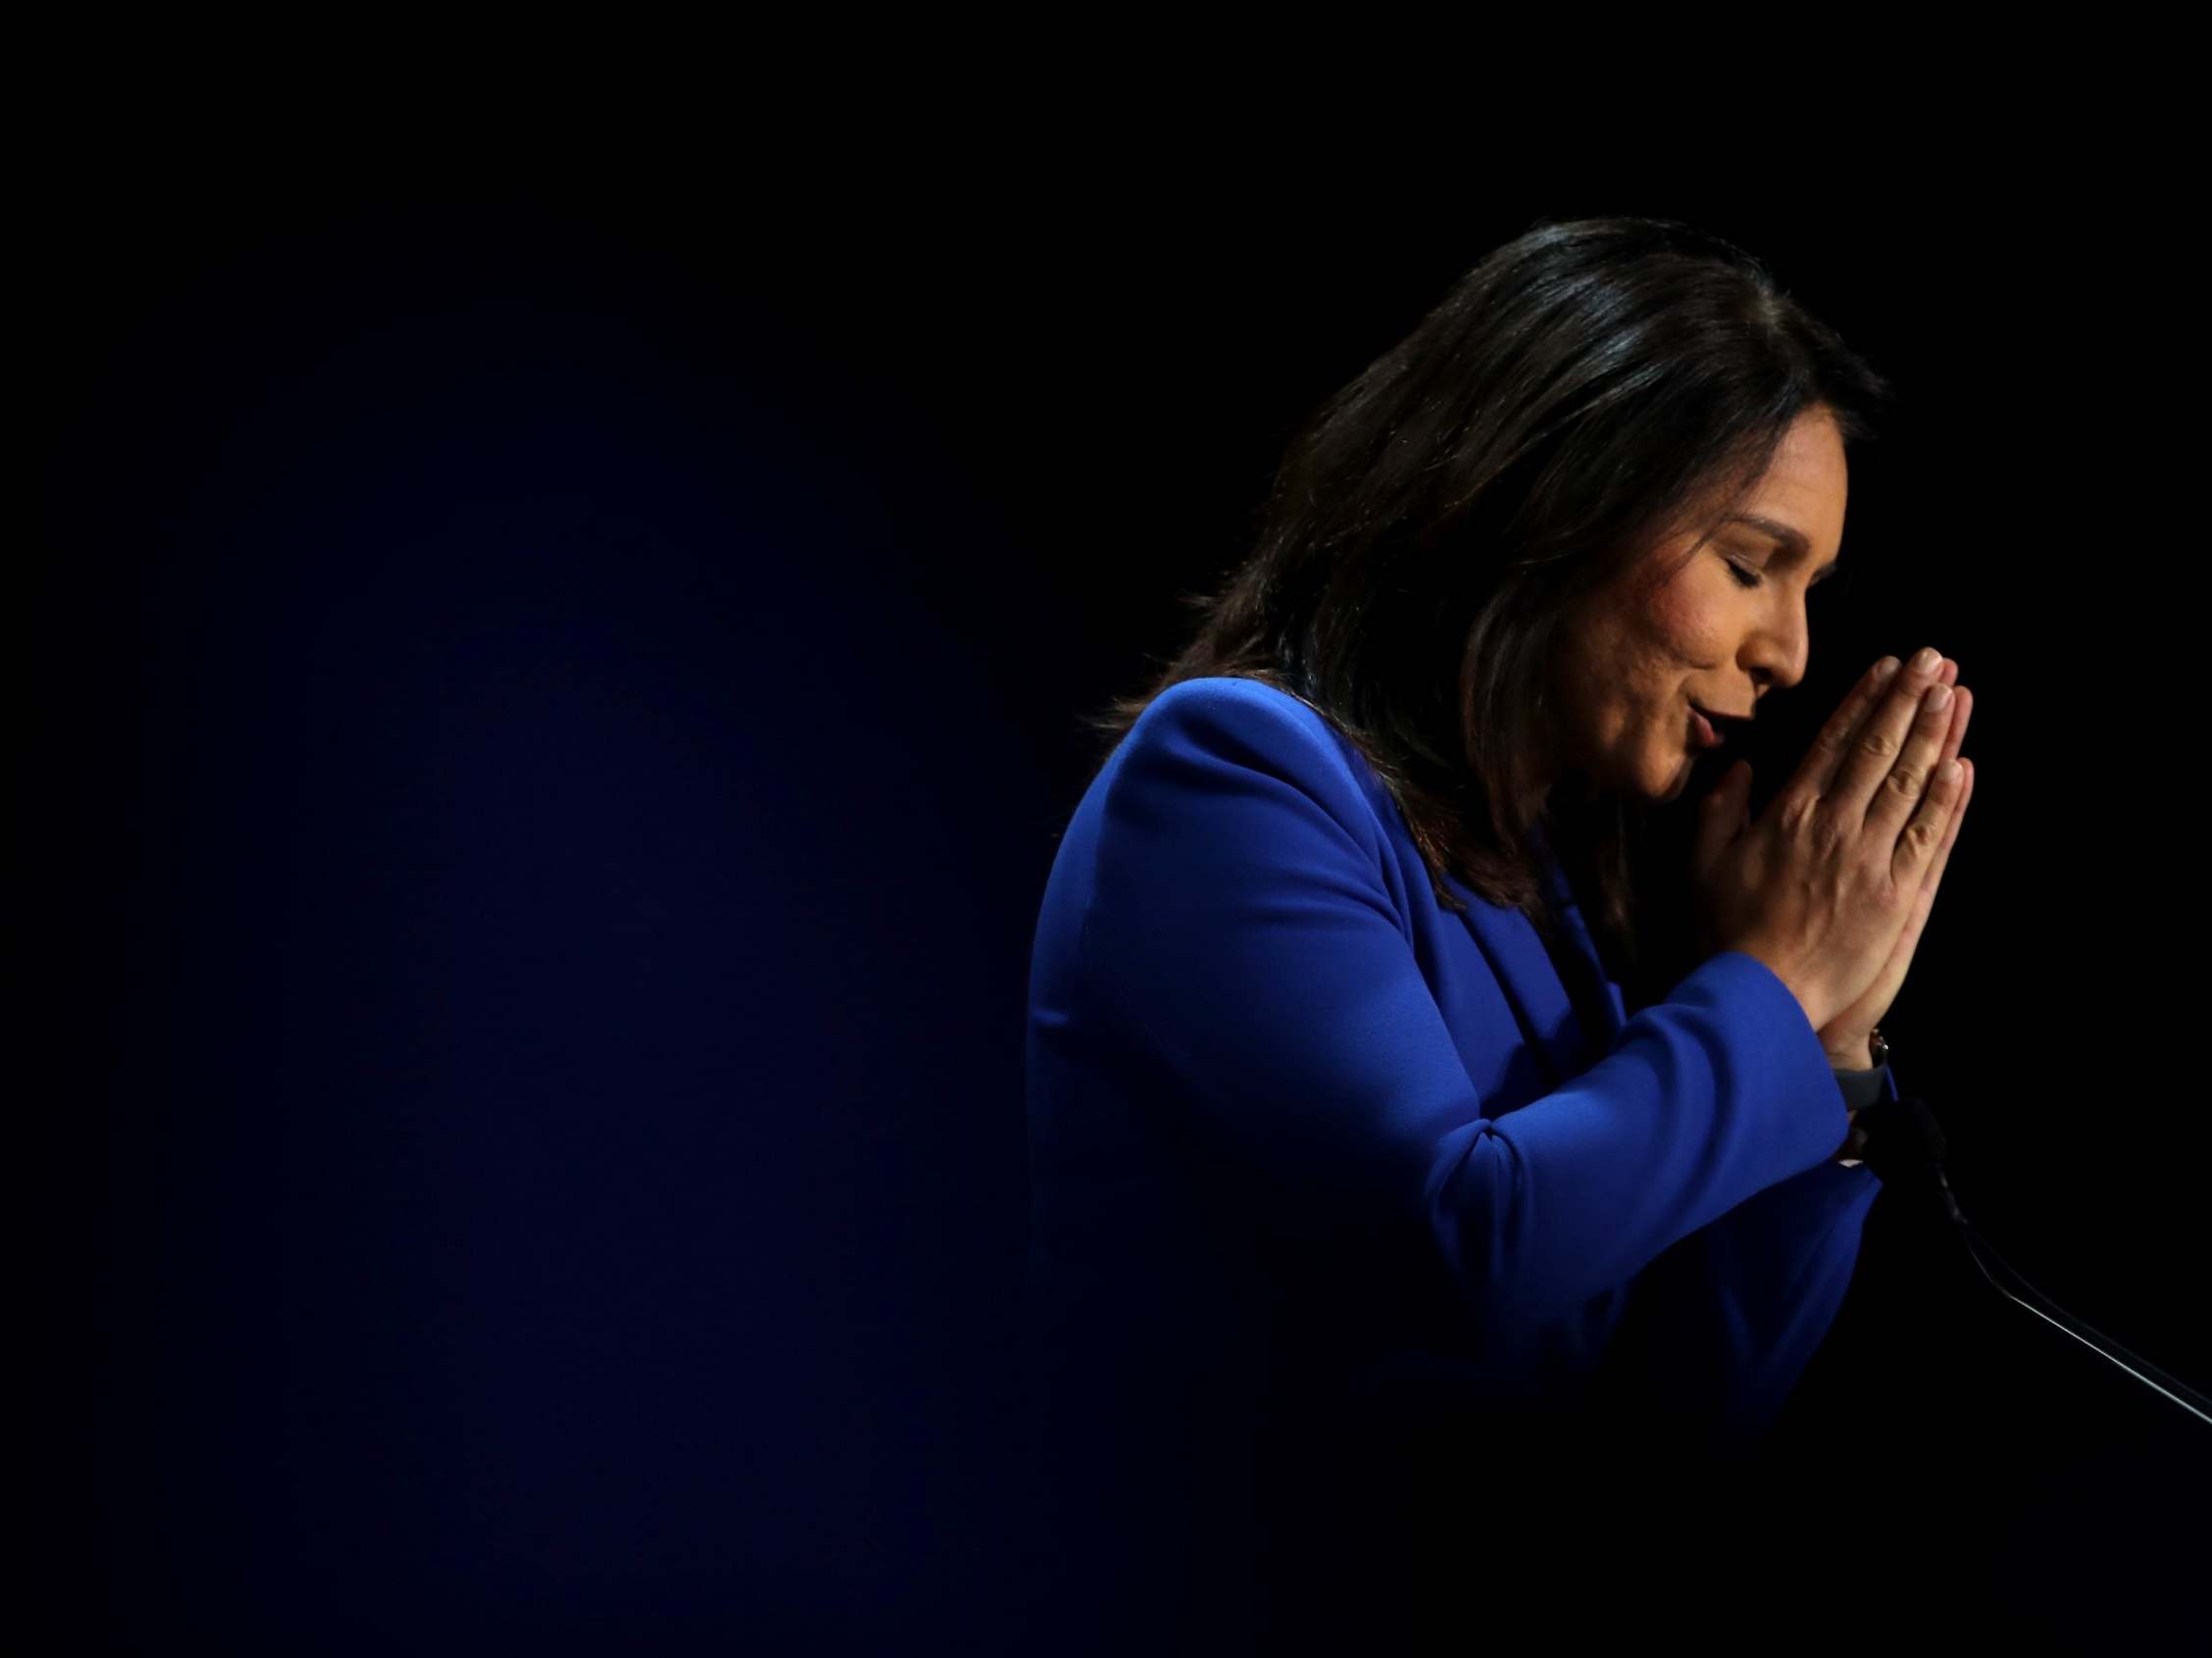 As US-Iran tensions increase, Tulsi Gabbard calls her 2020 candidacy a 'threat to the foreign policy lies sold to the American people'